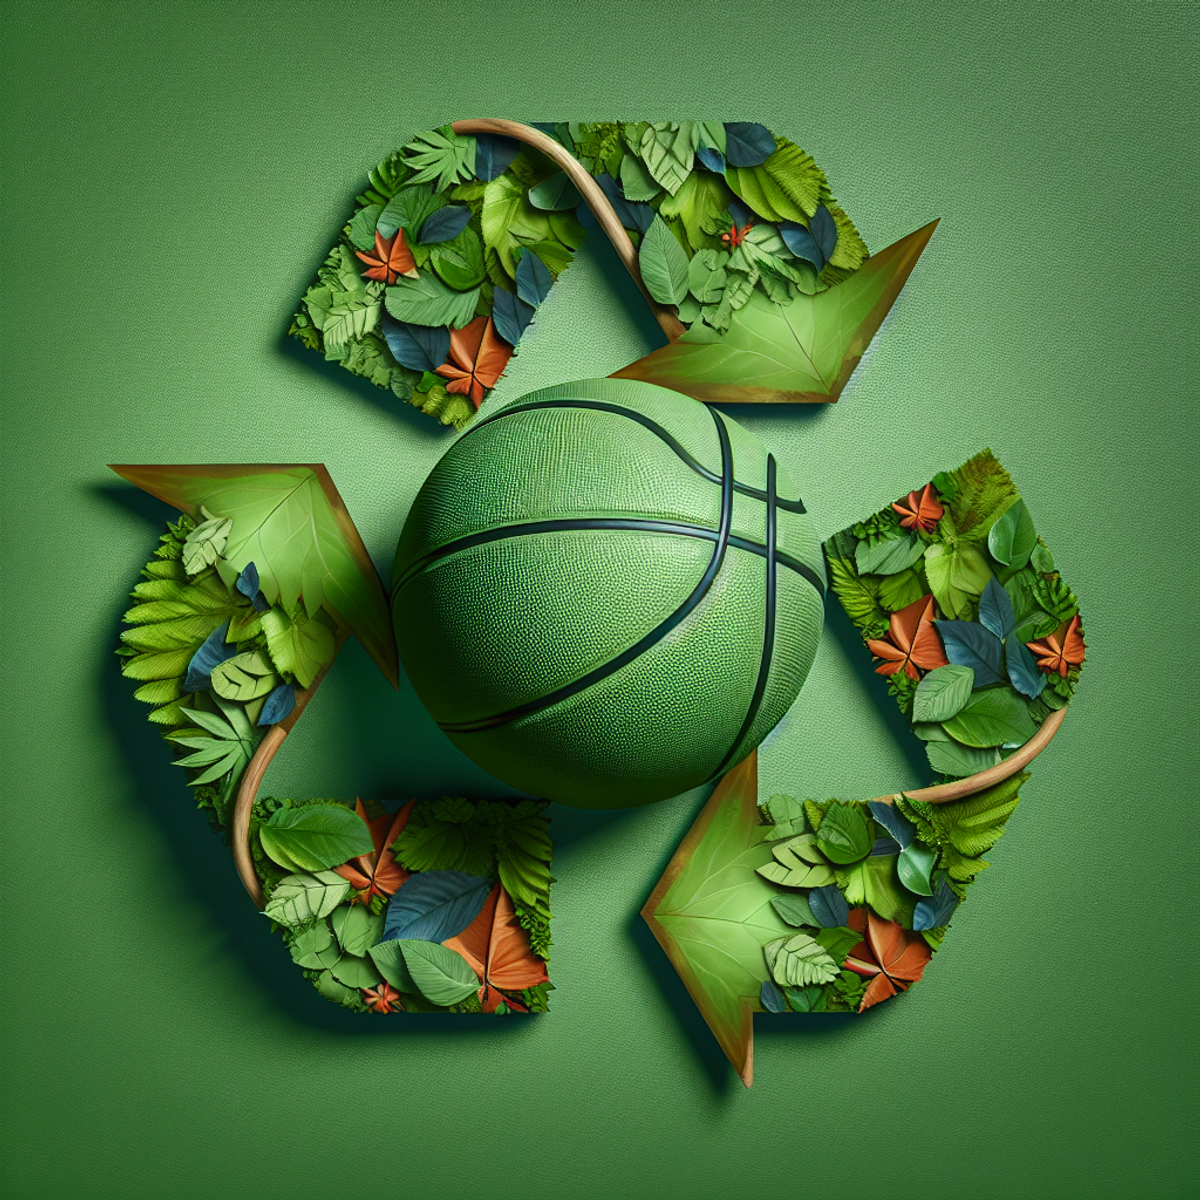 5 Brilliant Hacks to Make Your Basketball Gear More Eco-Friendly